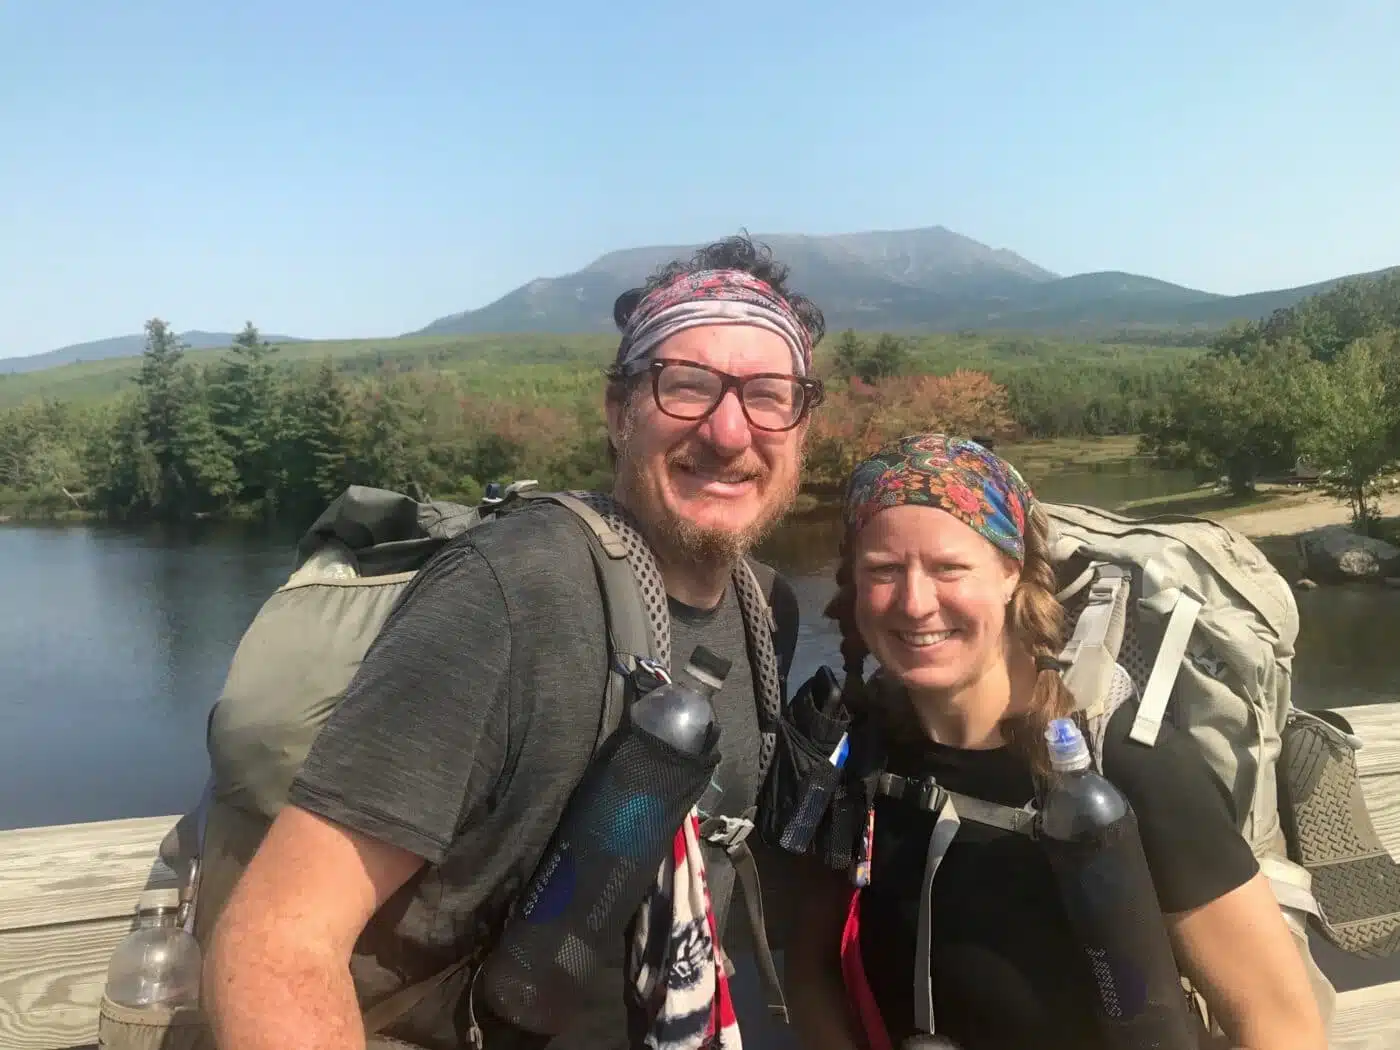 Are you thinking about thru-hiking hiking the Appalachian Trail? Here are 5 things to know before planning an Appalachian Trail thru-hike from Springer Moutain to Katahdin